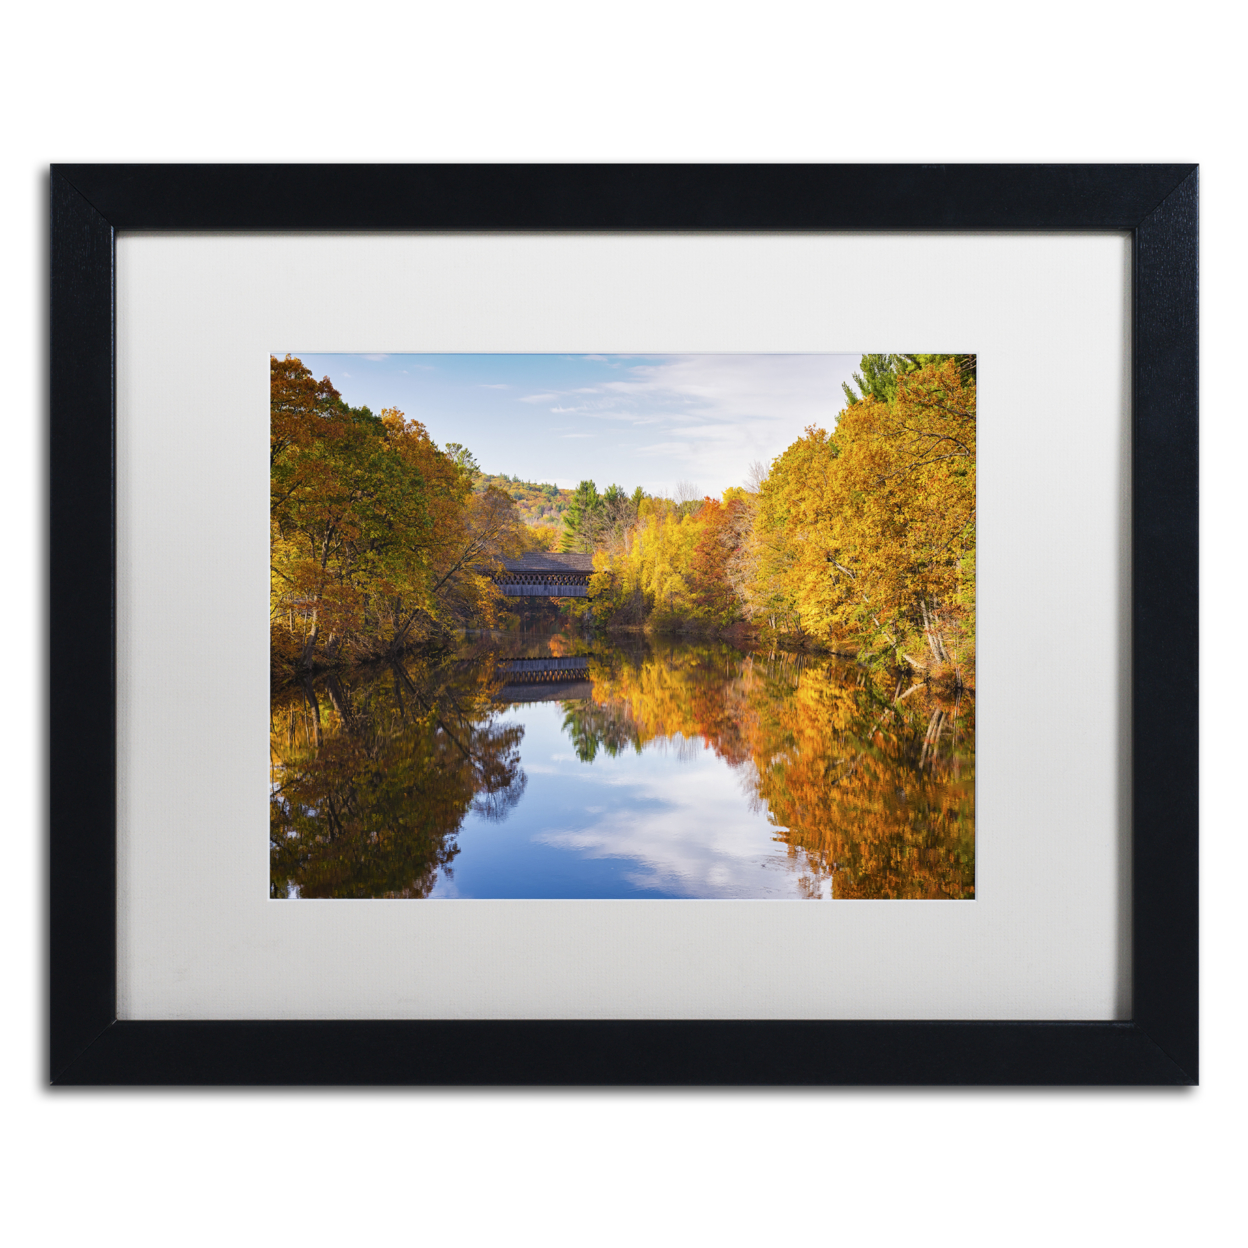 Michael Blanchette Photography 'Wooden Reflection' Black Wooden Framed Art 18 X 22 Inches